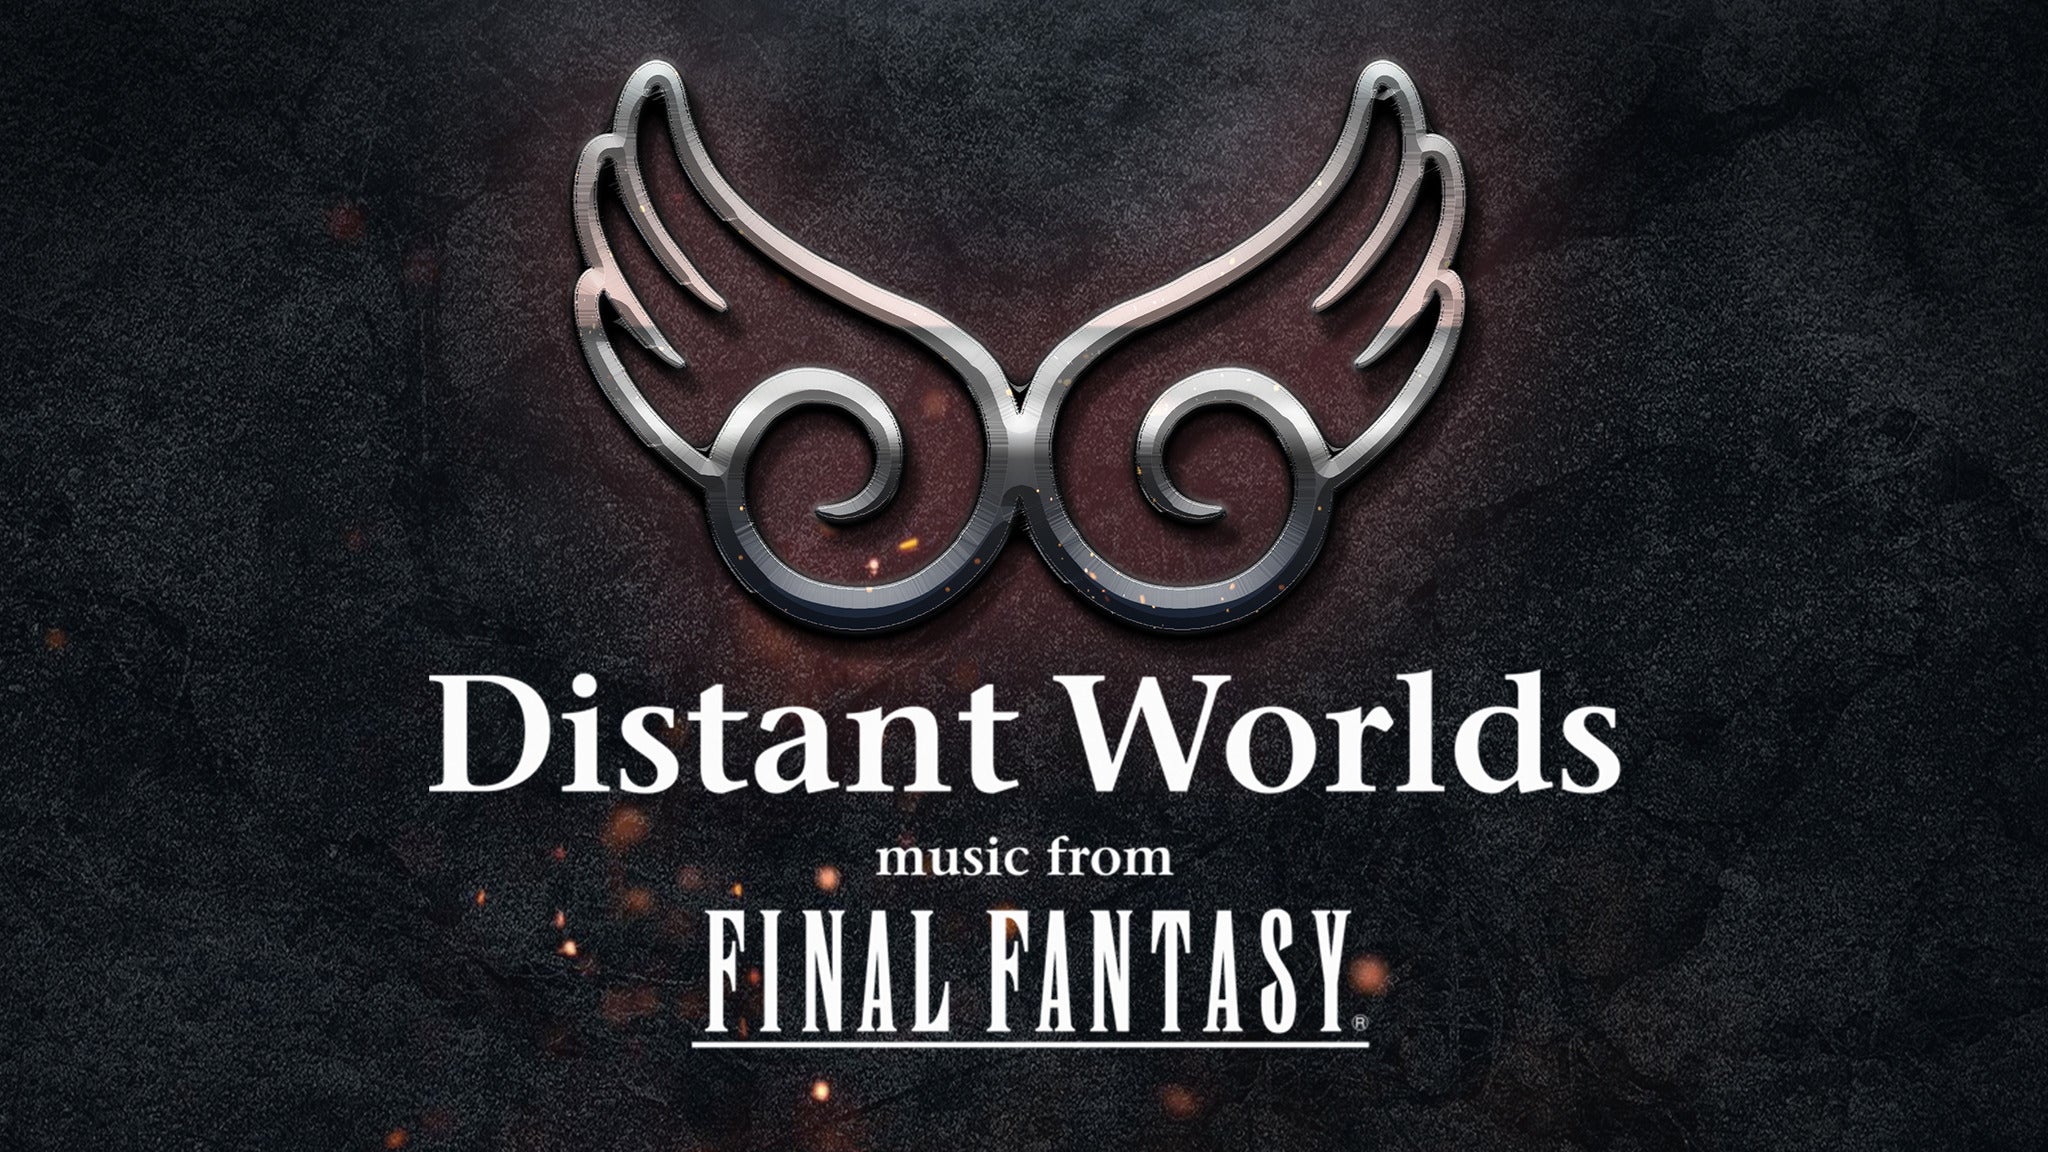 Distant Worlds: music from FINAL FANTASY pre-sale code